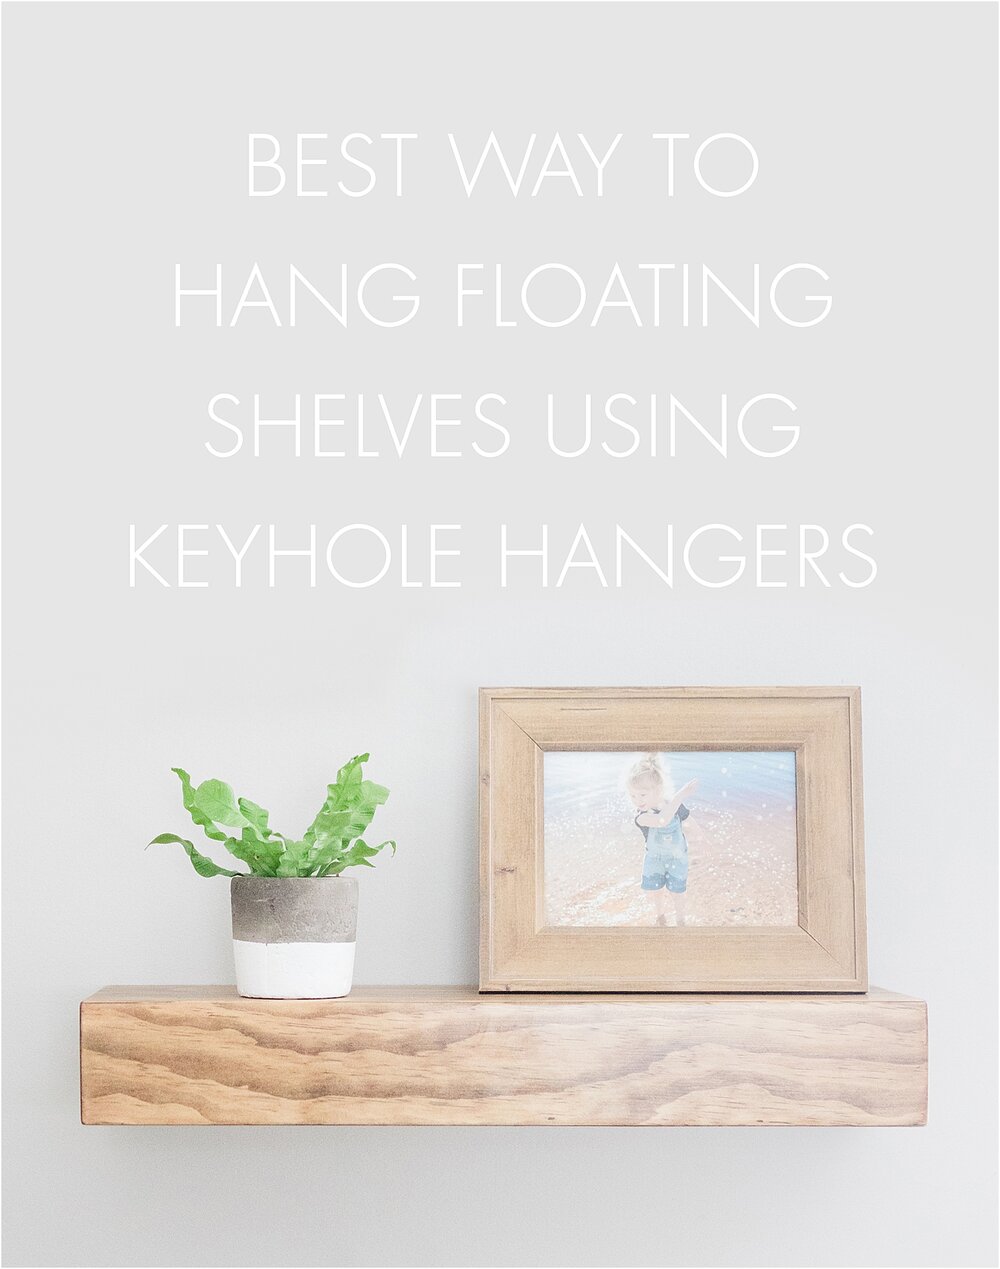 How To Hang Floating Shelves With, How To Hang Suspended Shelves